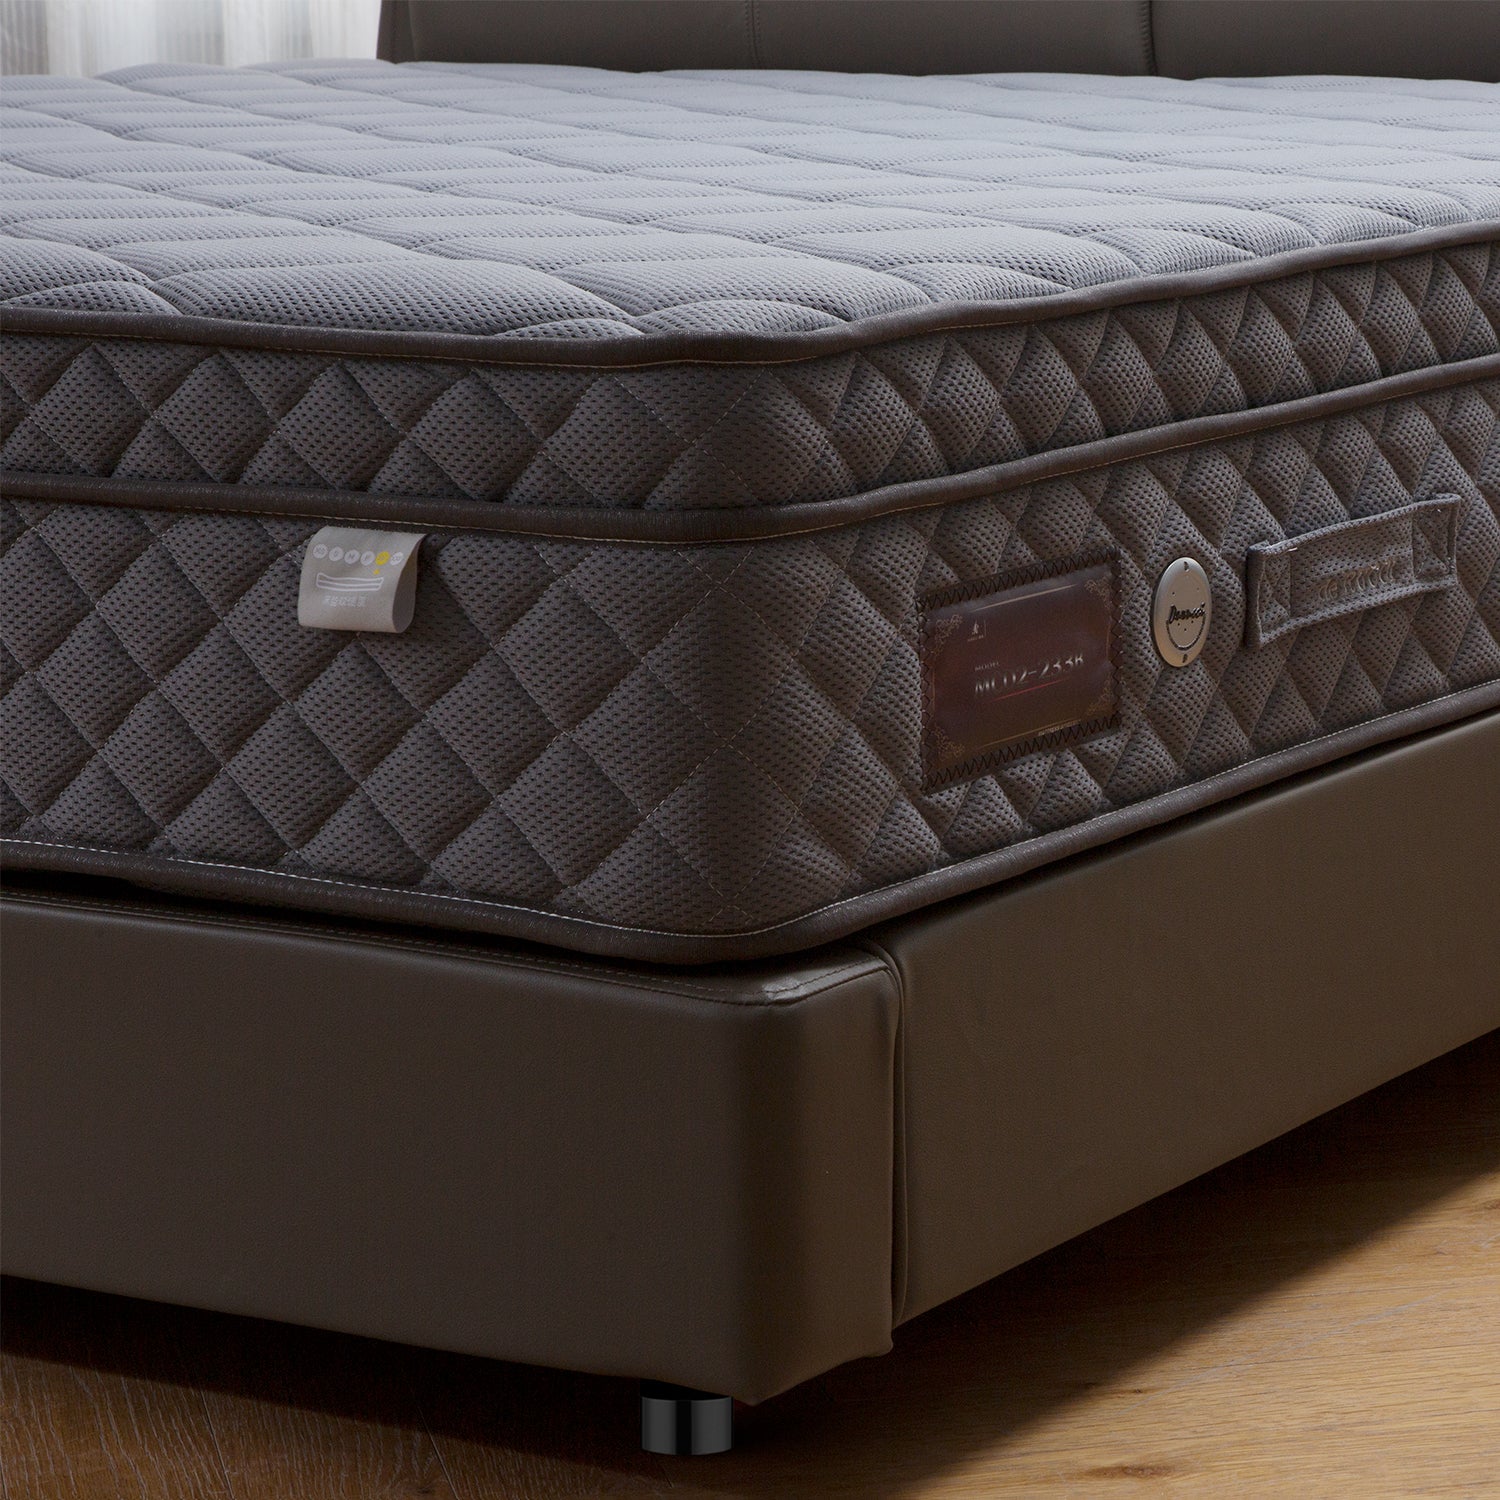 Close-up of DeRUCCI bed frame BZZ4 - 243 featuring a quilted grey mattress with various tags and labels, and a dark brown upholstered bed frame with a minimalist design.